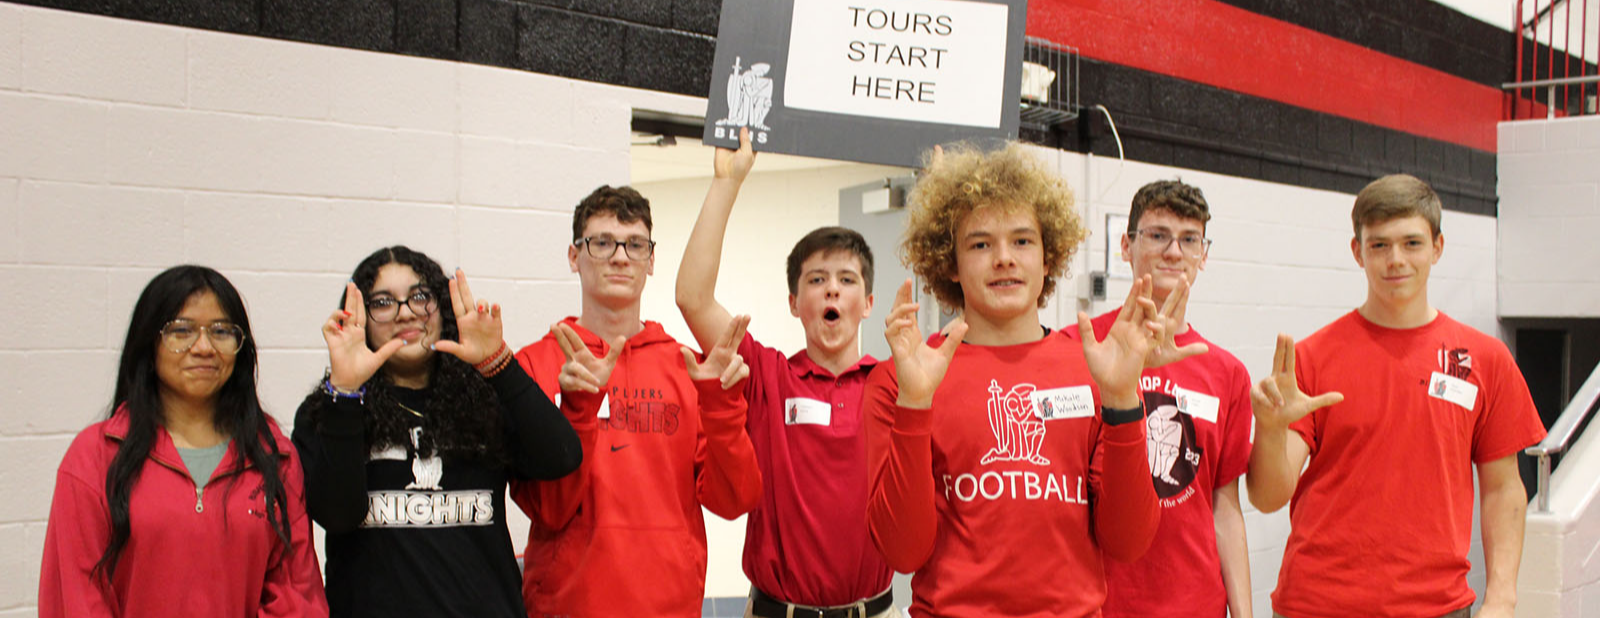 Smiling Luers students with a "Tours Start Here" sign